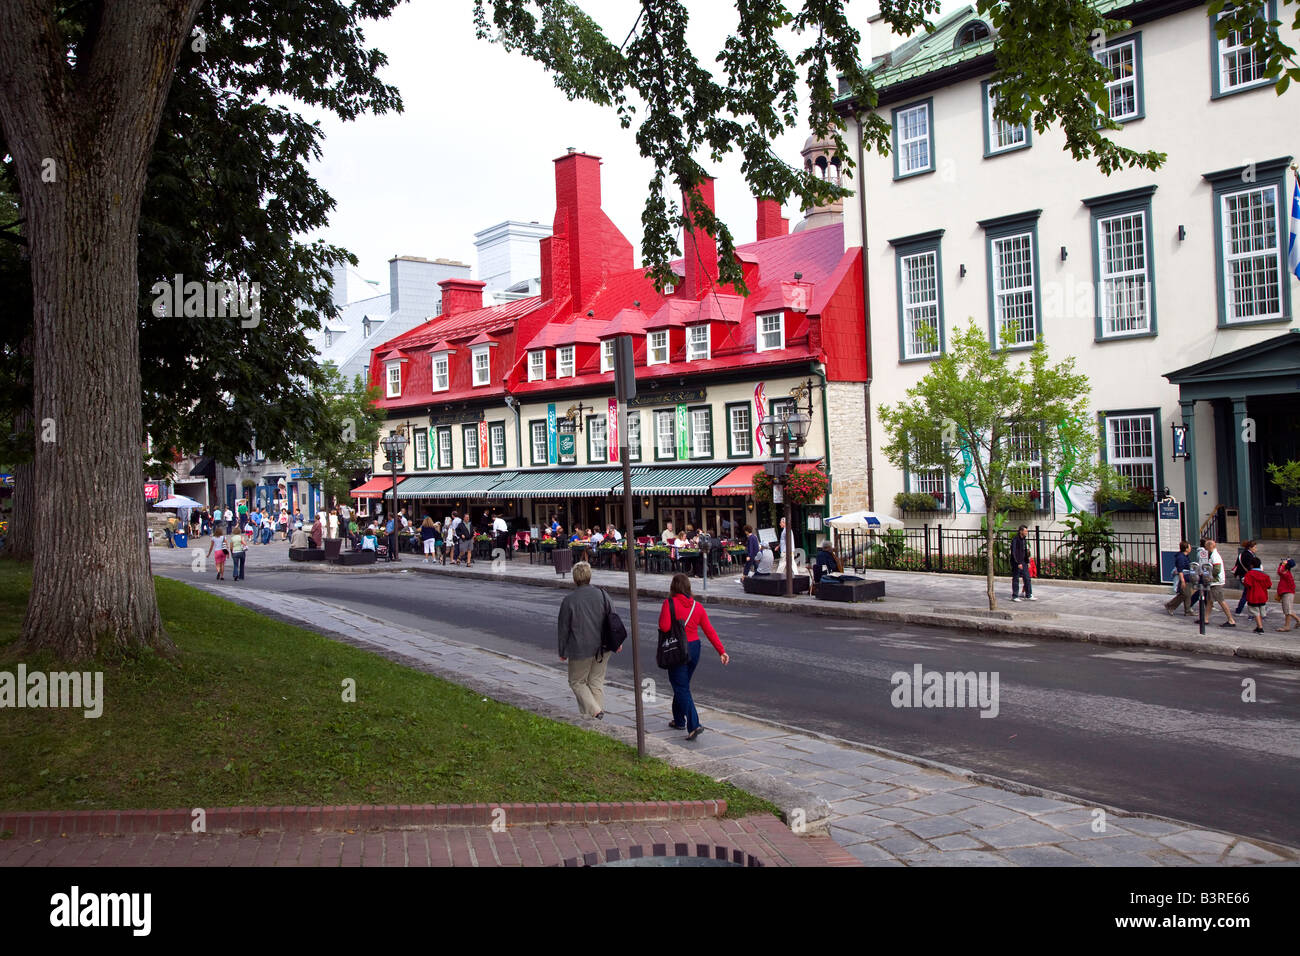 Red Roof Building in Quebec City at 400 Years old. Most of the historic section of Old Quebec is within the walls of Upper Town Stock Photo